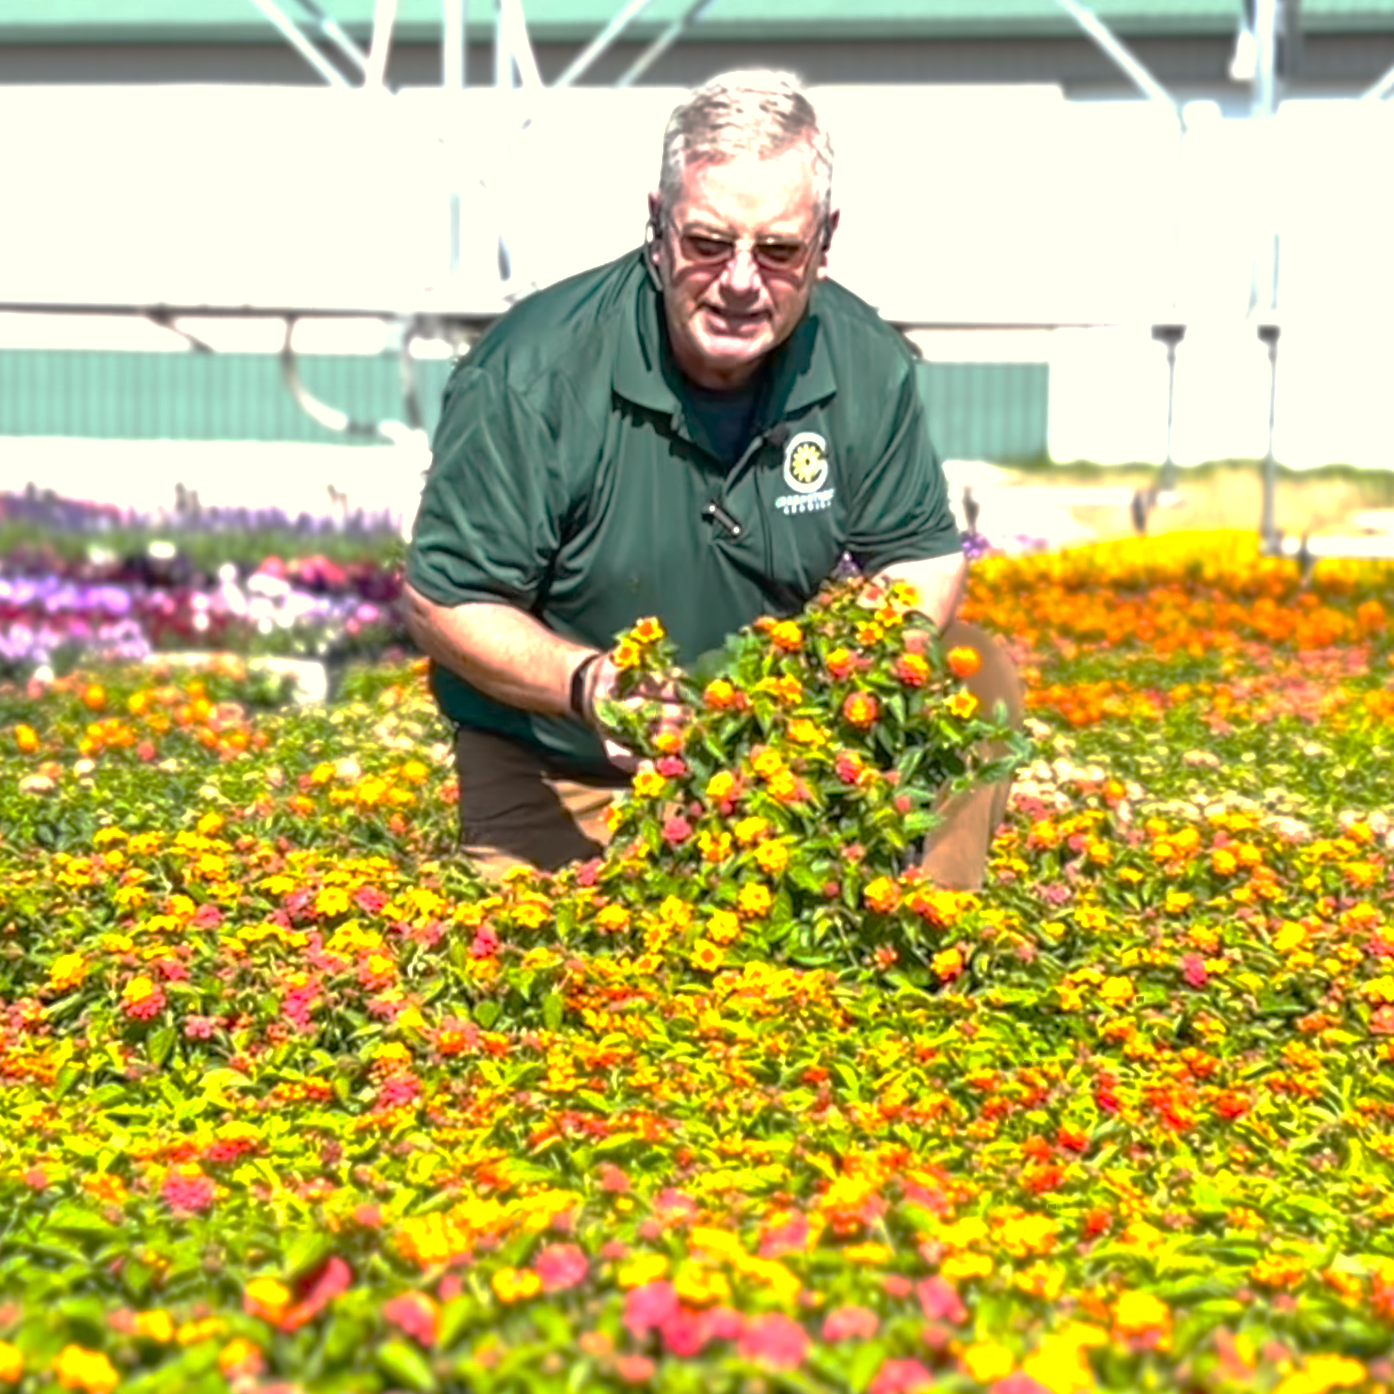 A stunning display of Greenstreet Growers' Lantana annuals, revealing a kaleidoscope of color from the bright yellows to the deep oranges, all flourishing under our sustainable horticultural methods and signifying a dedication to vibrant, environmentally responsible gardens.